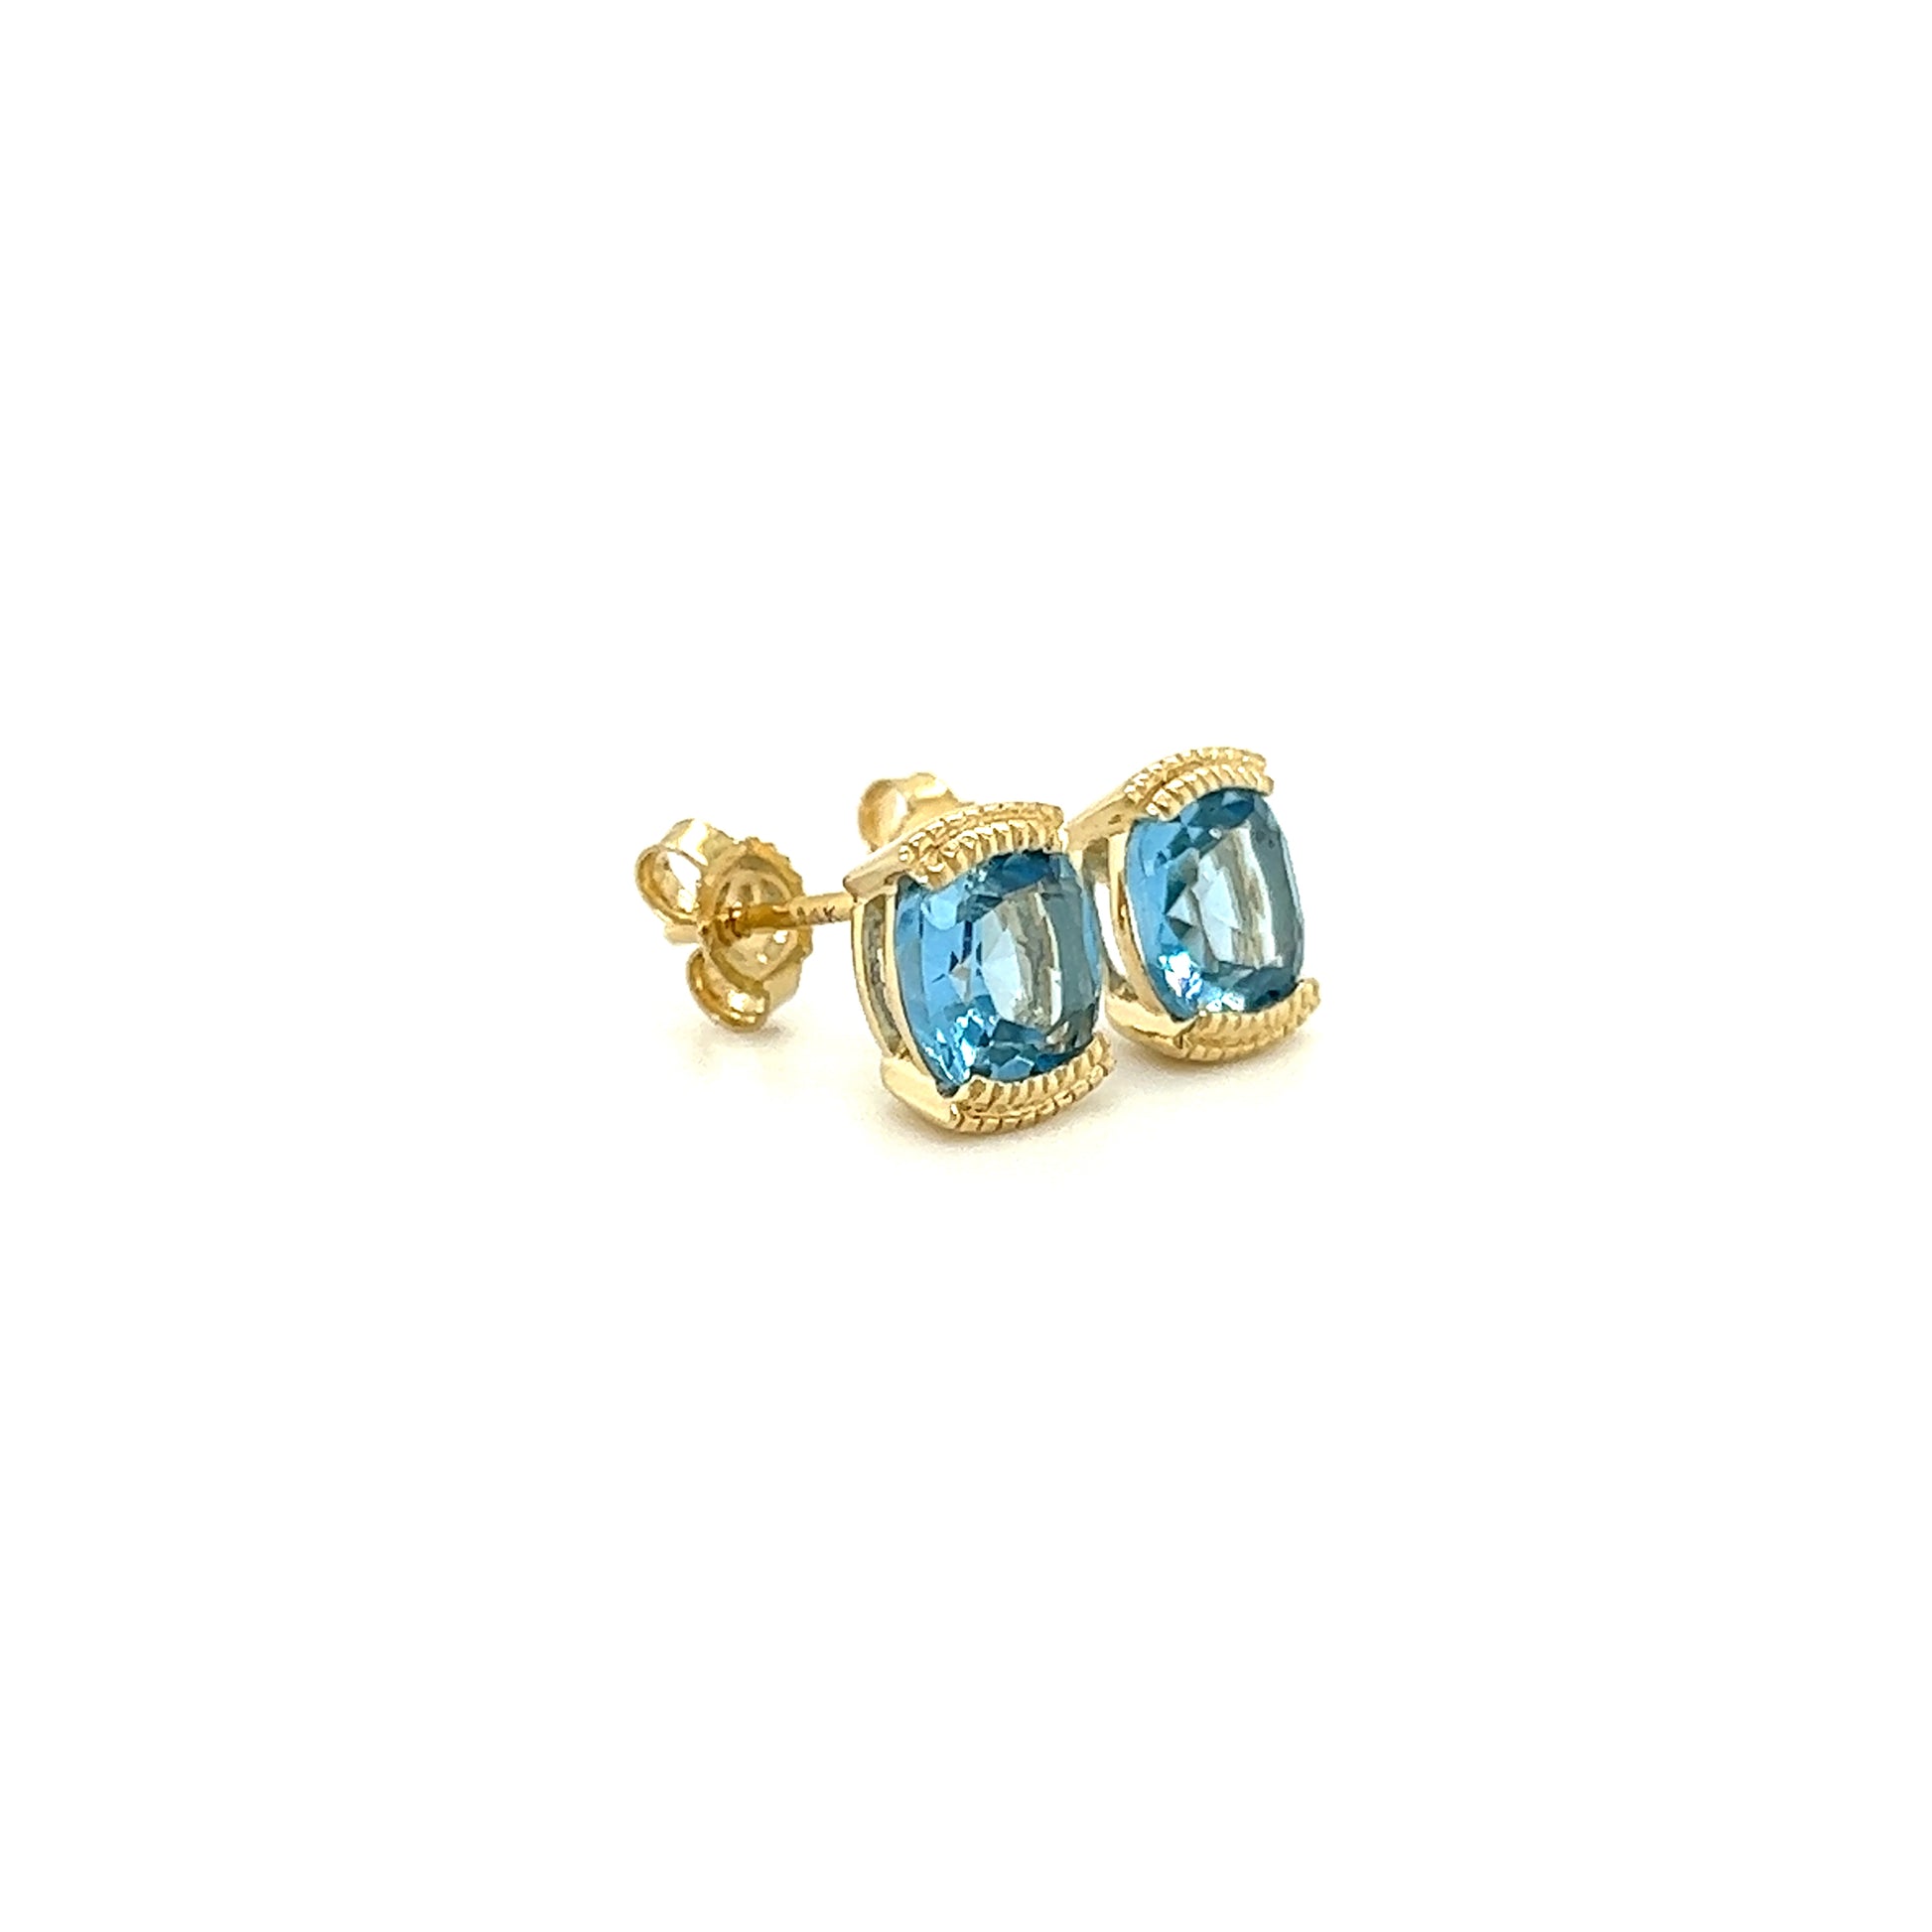 Cushion Blue Topaz Stud Earrings with 1.78ctw of Swiss Blue Topaz in 14K Yellow Gold Left Side View